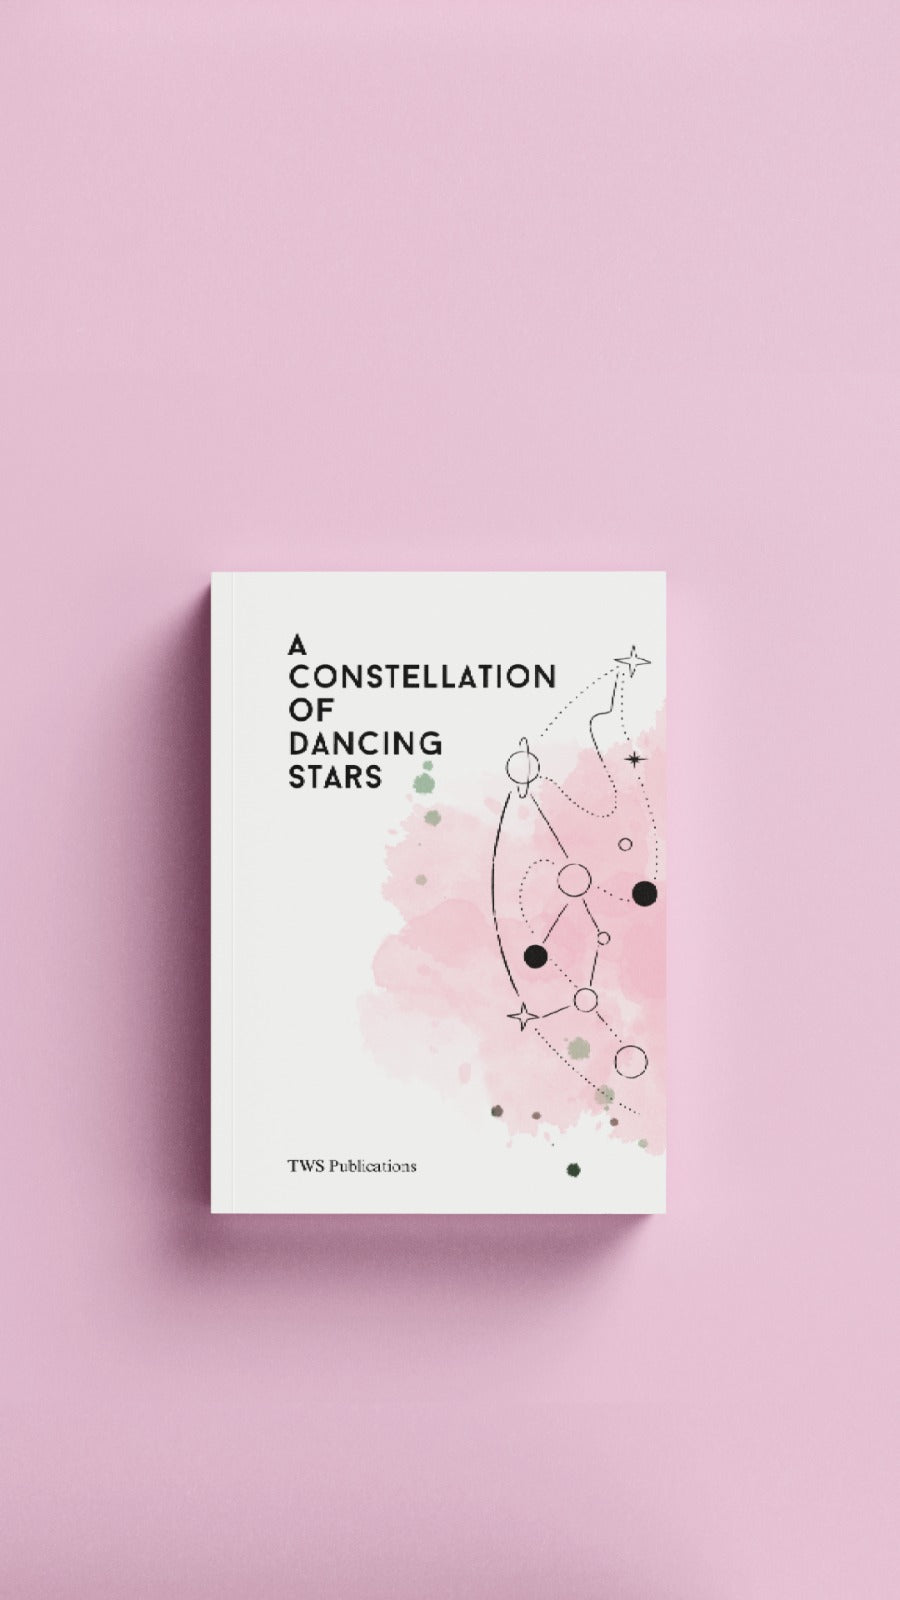 A Constellation of Dancing Stars